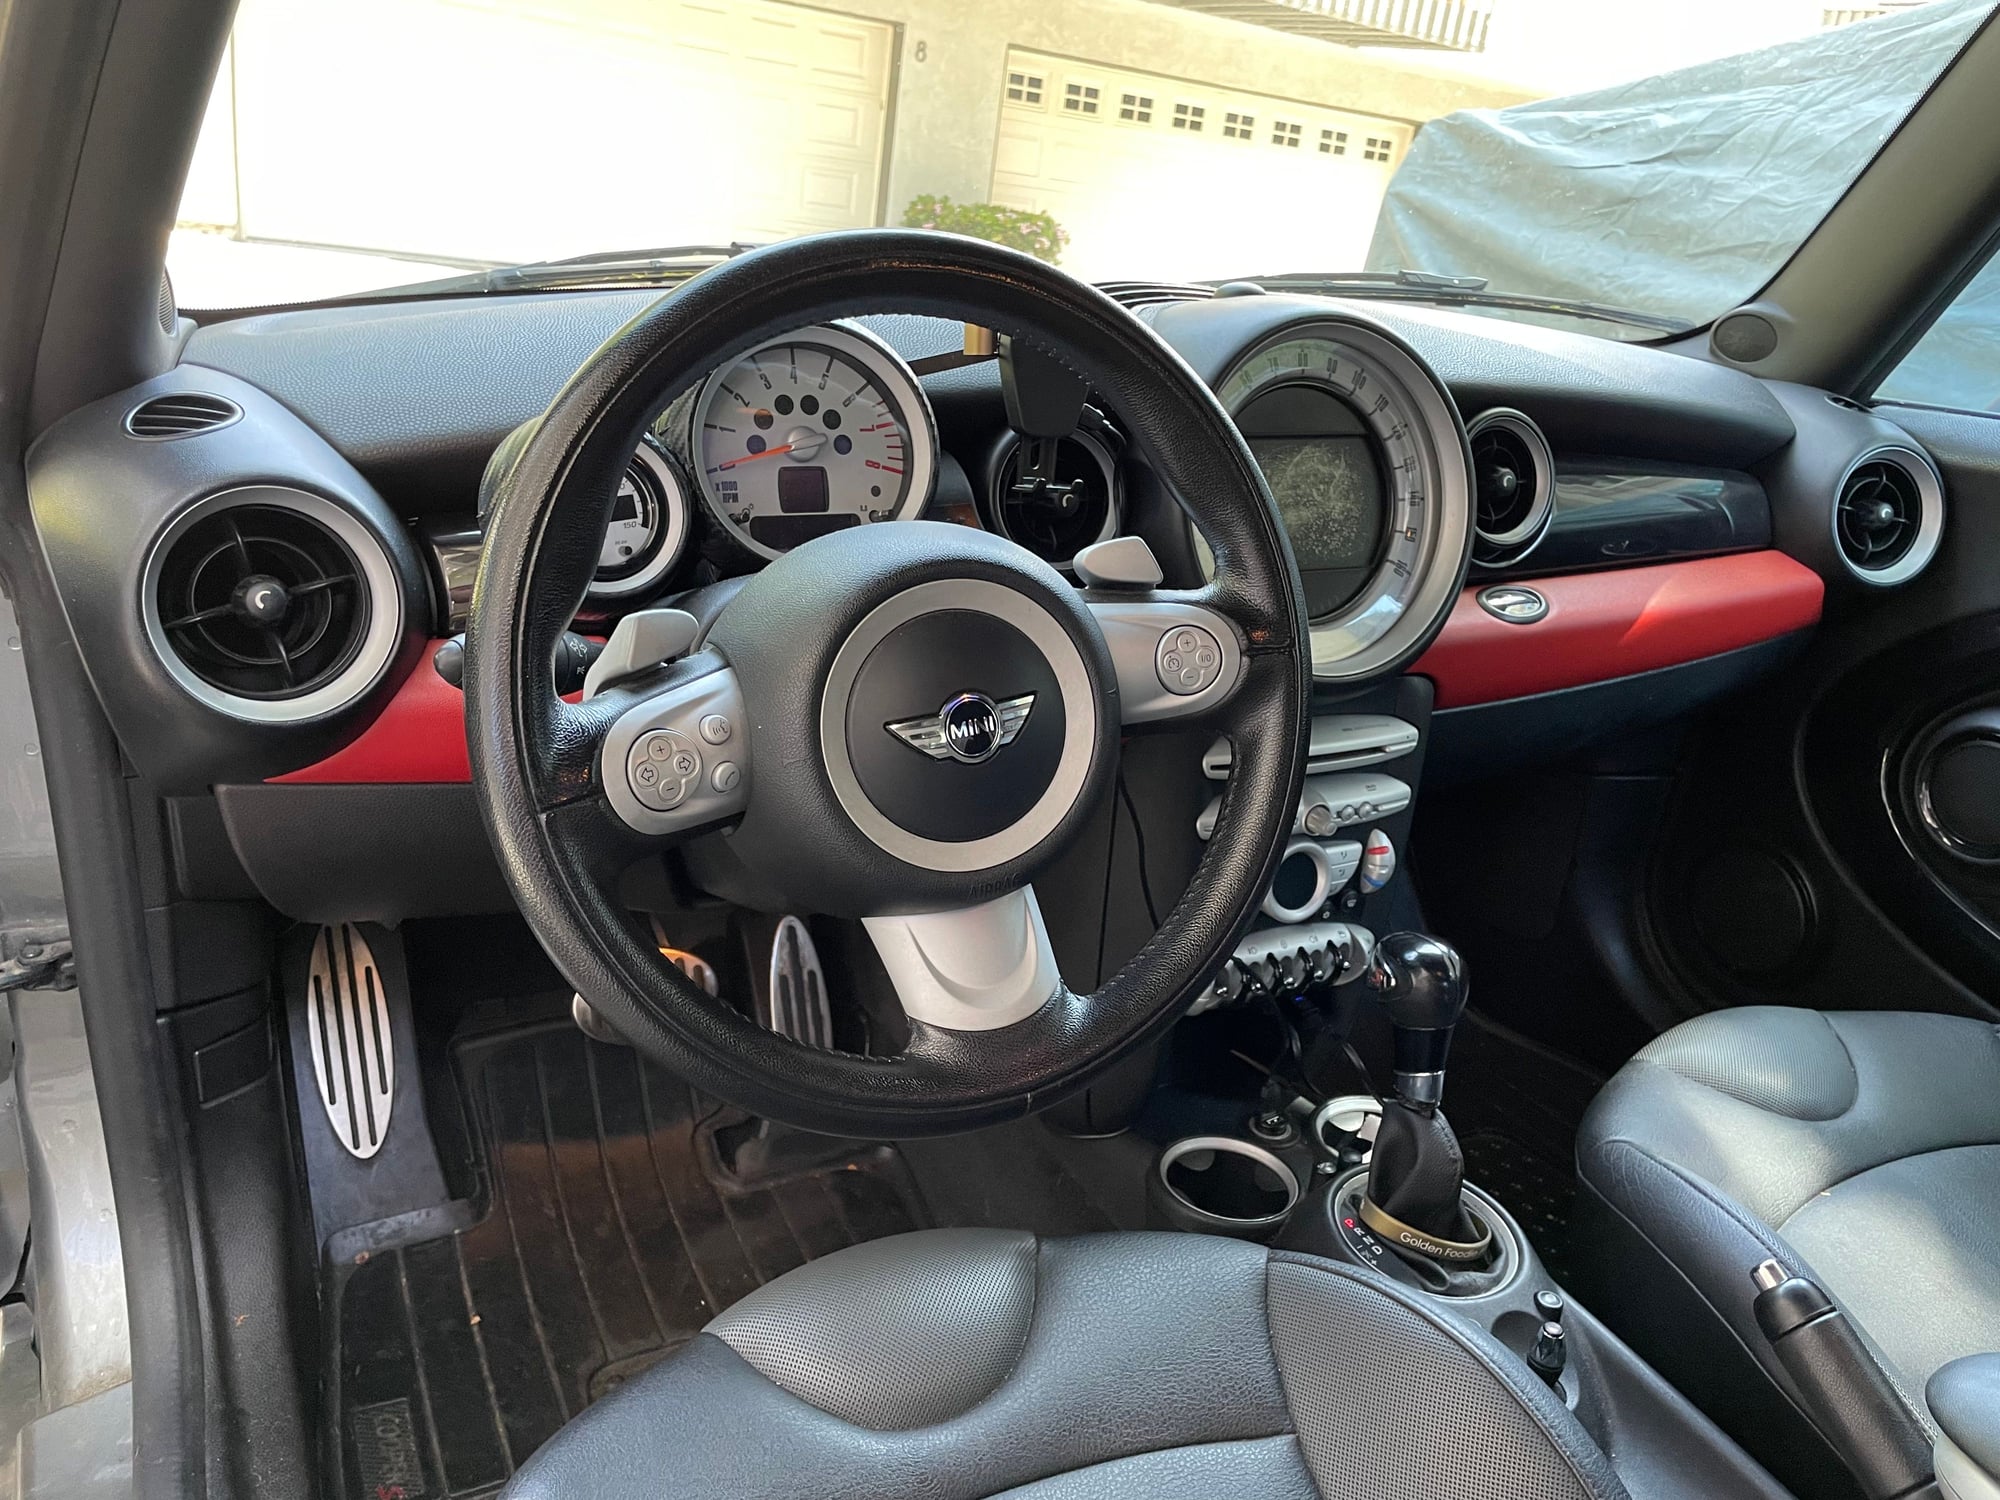 09 JCW R56 fully loaded with lots of extra parts!!! - North American ...